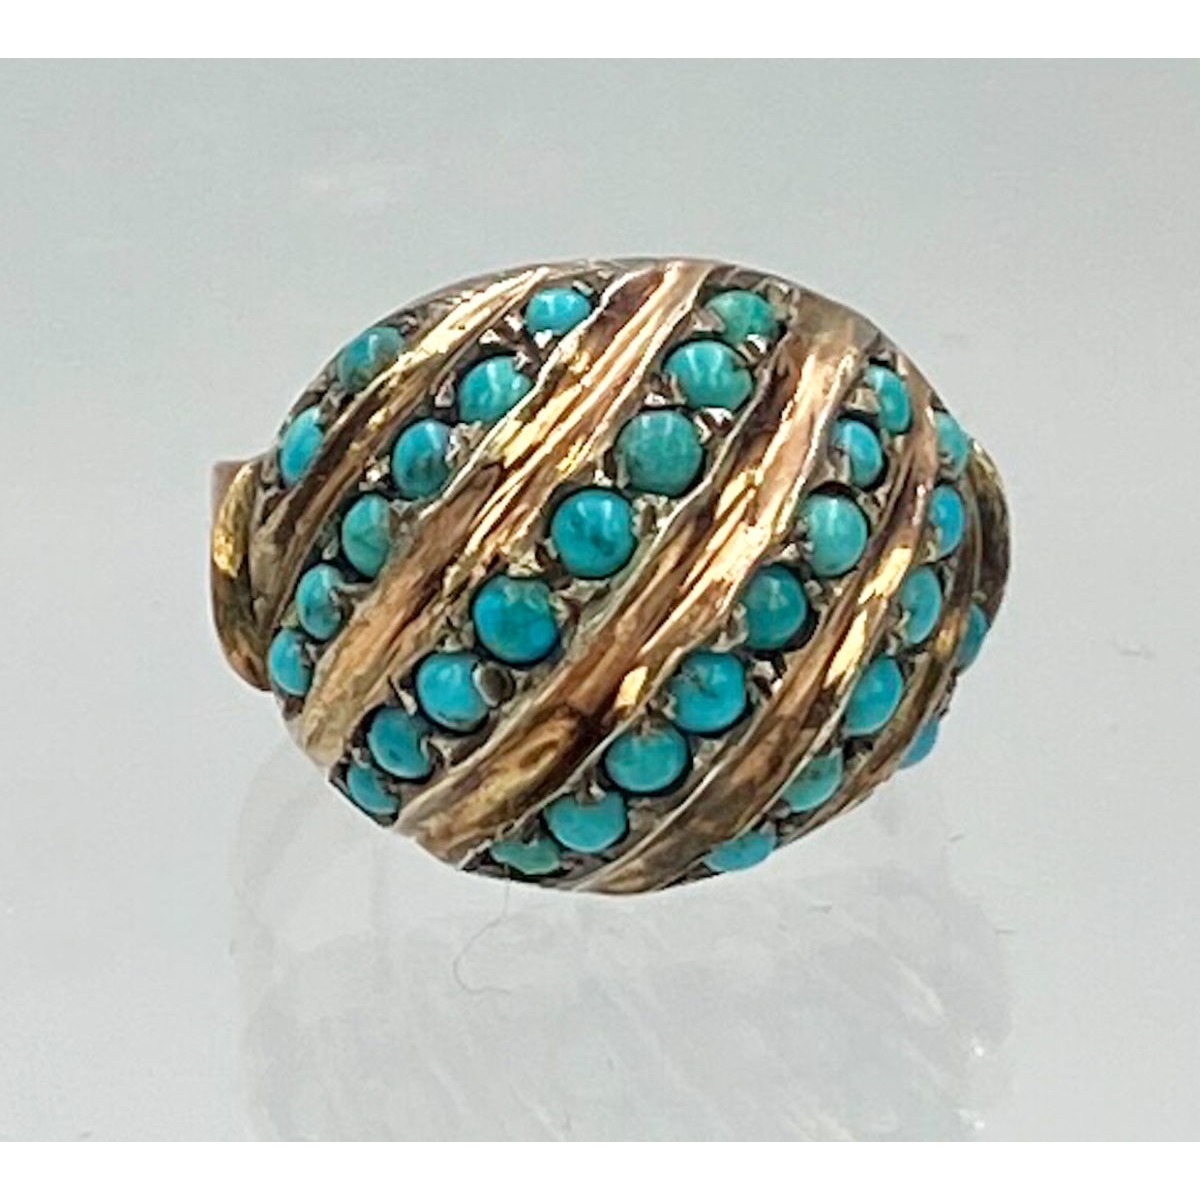 Diagonal Rows of Persian Turquoise in a Rose Gold Antique English Dome Ring